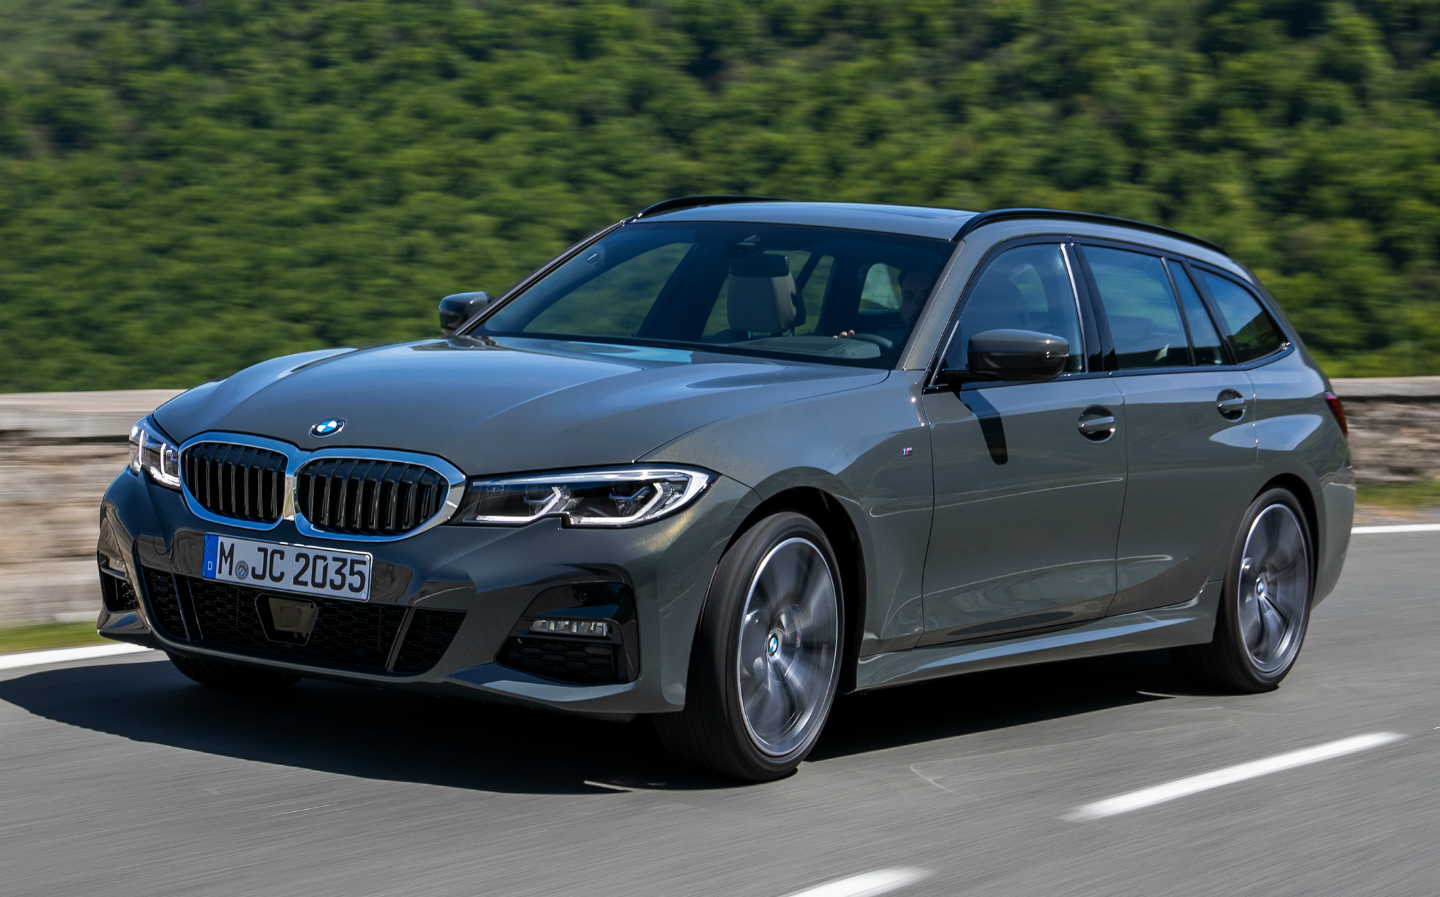 503HP BMW M3 Touring Combines Practicality and Performance